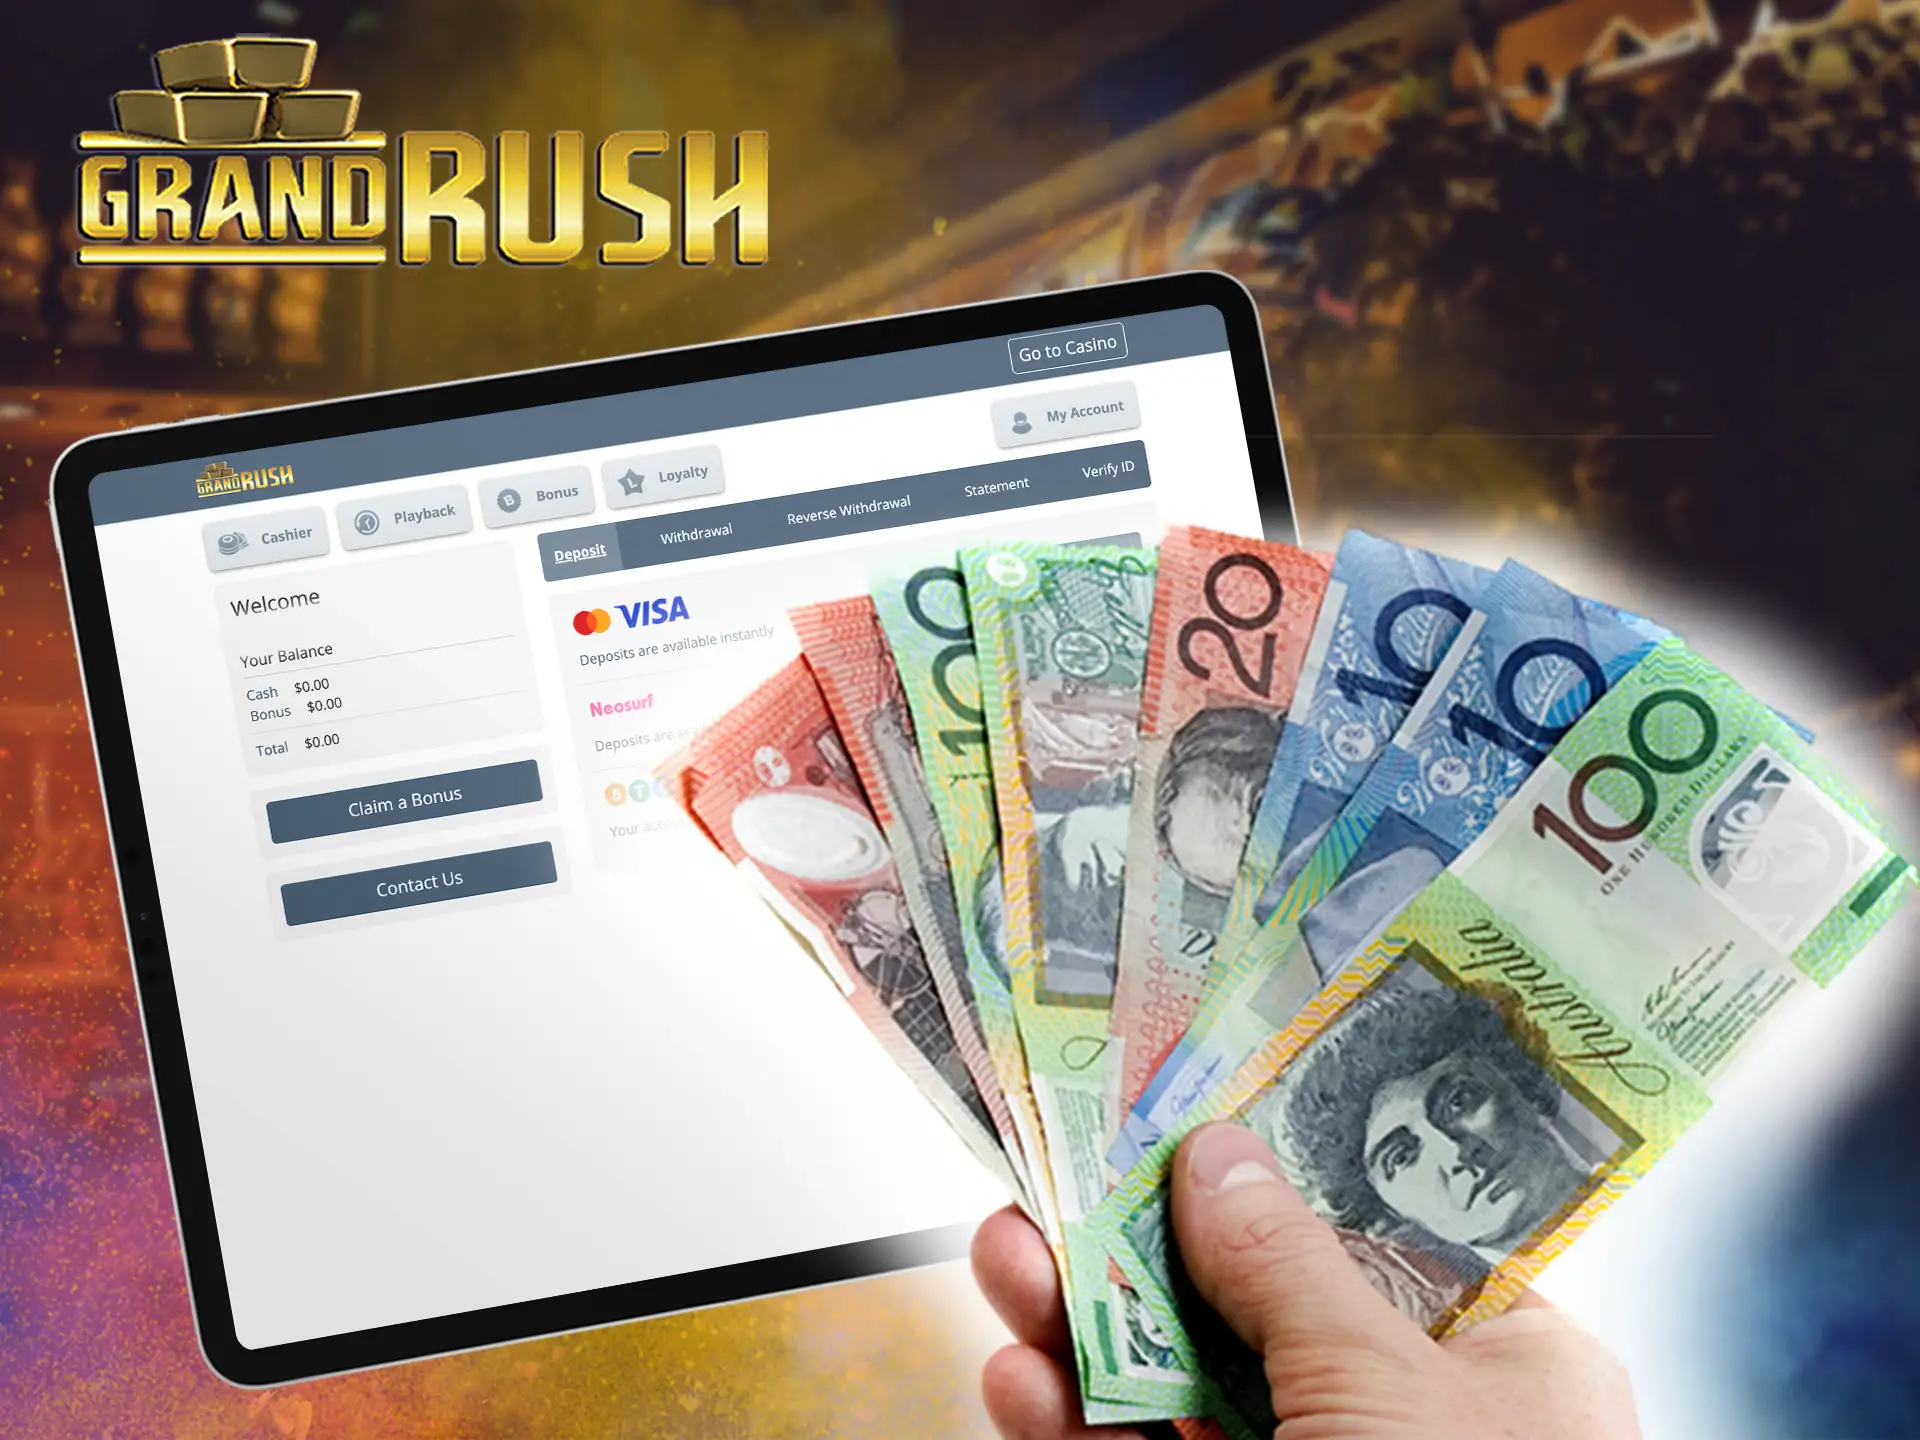 Learn how to deposit money at Grand Rush in 3 simple steps.